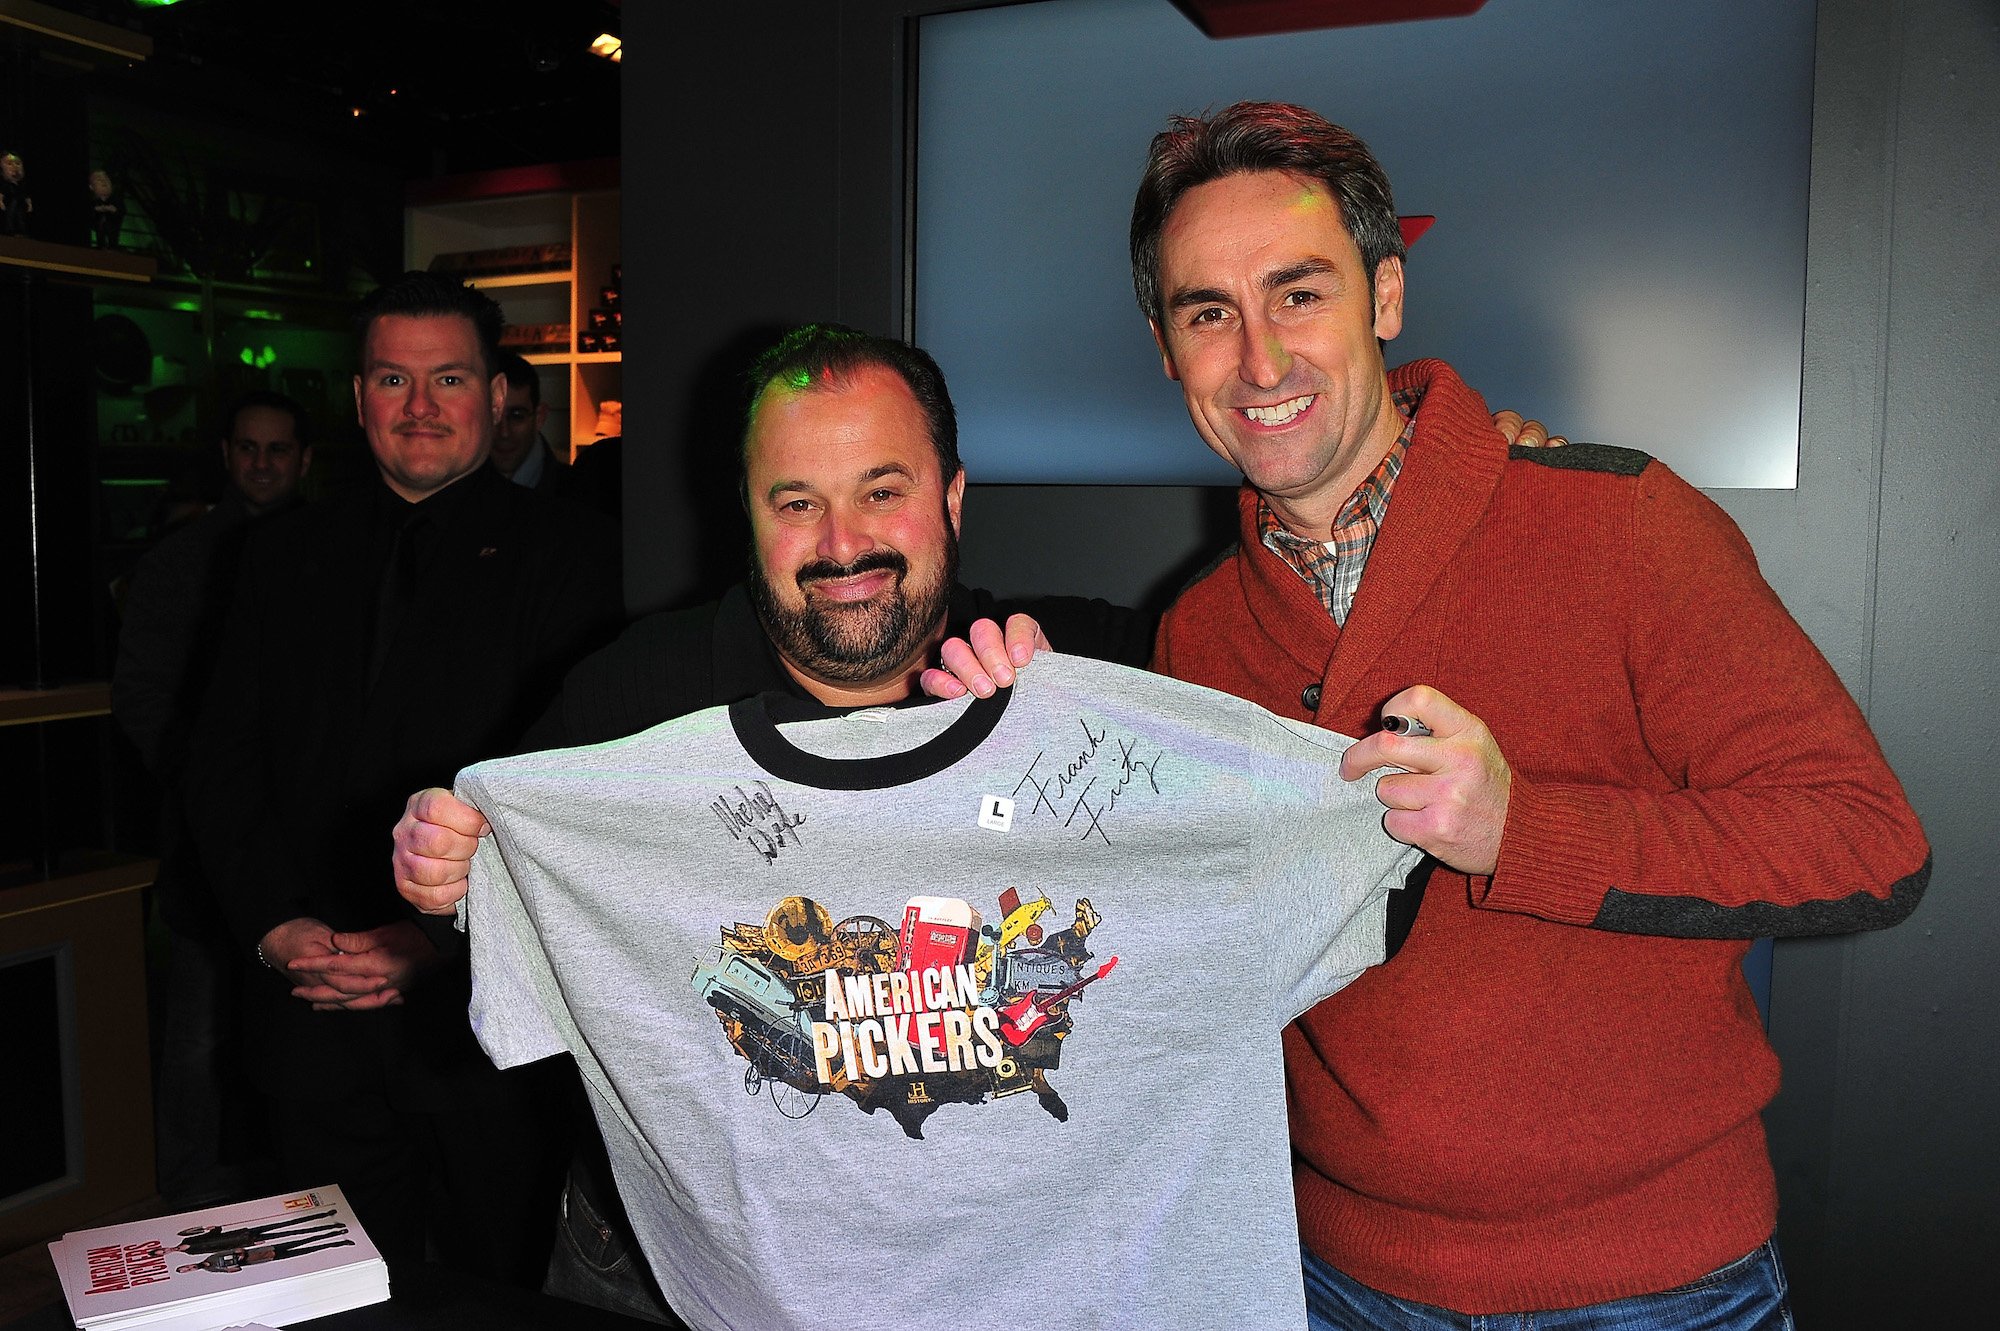 (L-R) Frank Fritz and Mike Wolfe from American Pickers holding up an autographed shirt and smiling